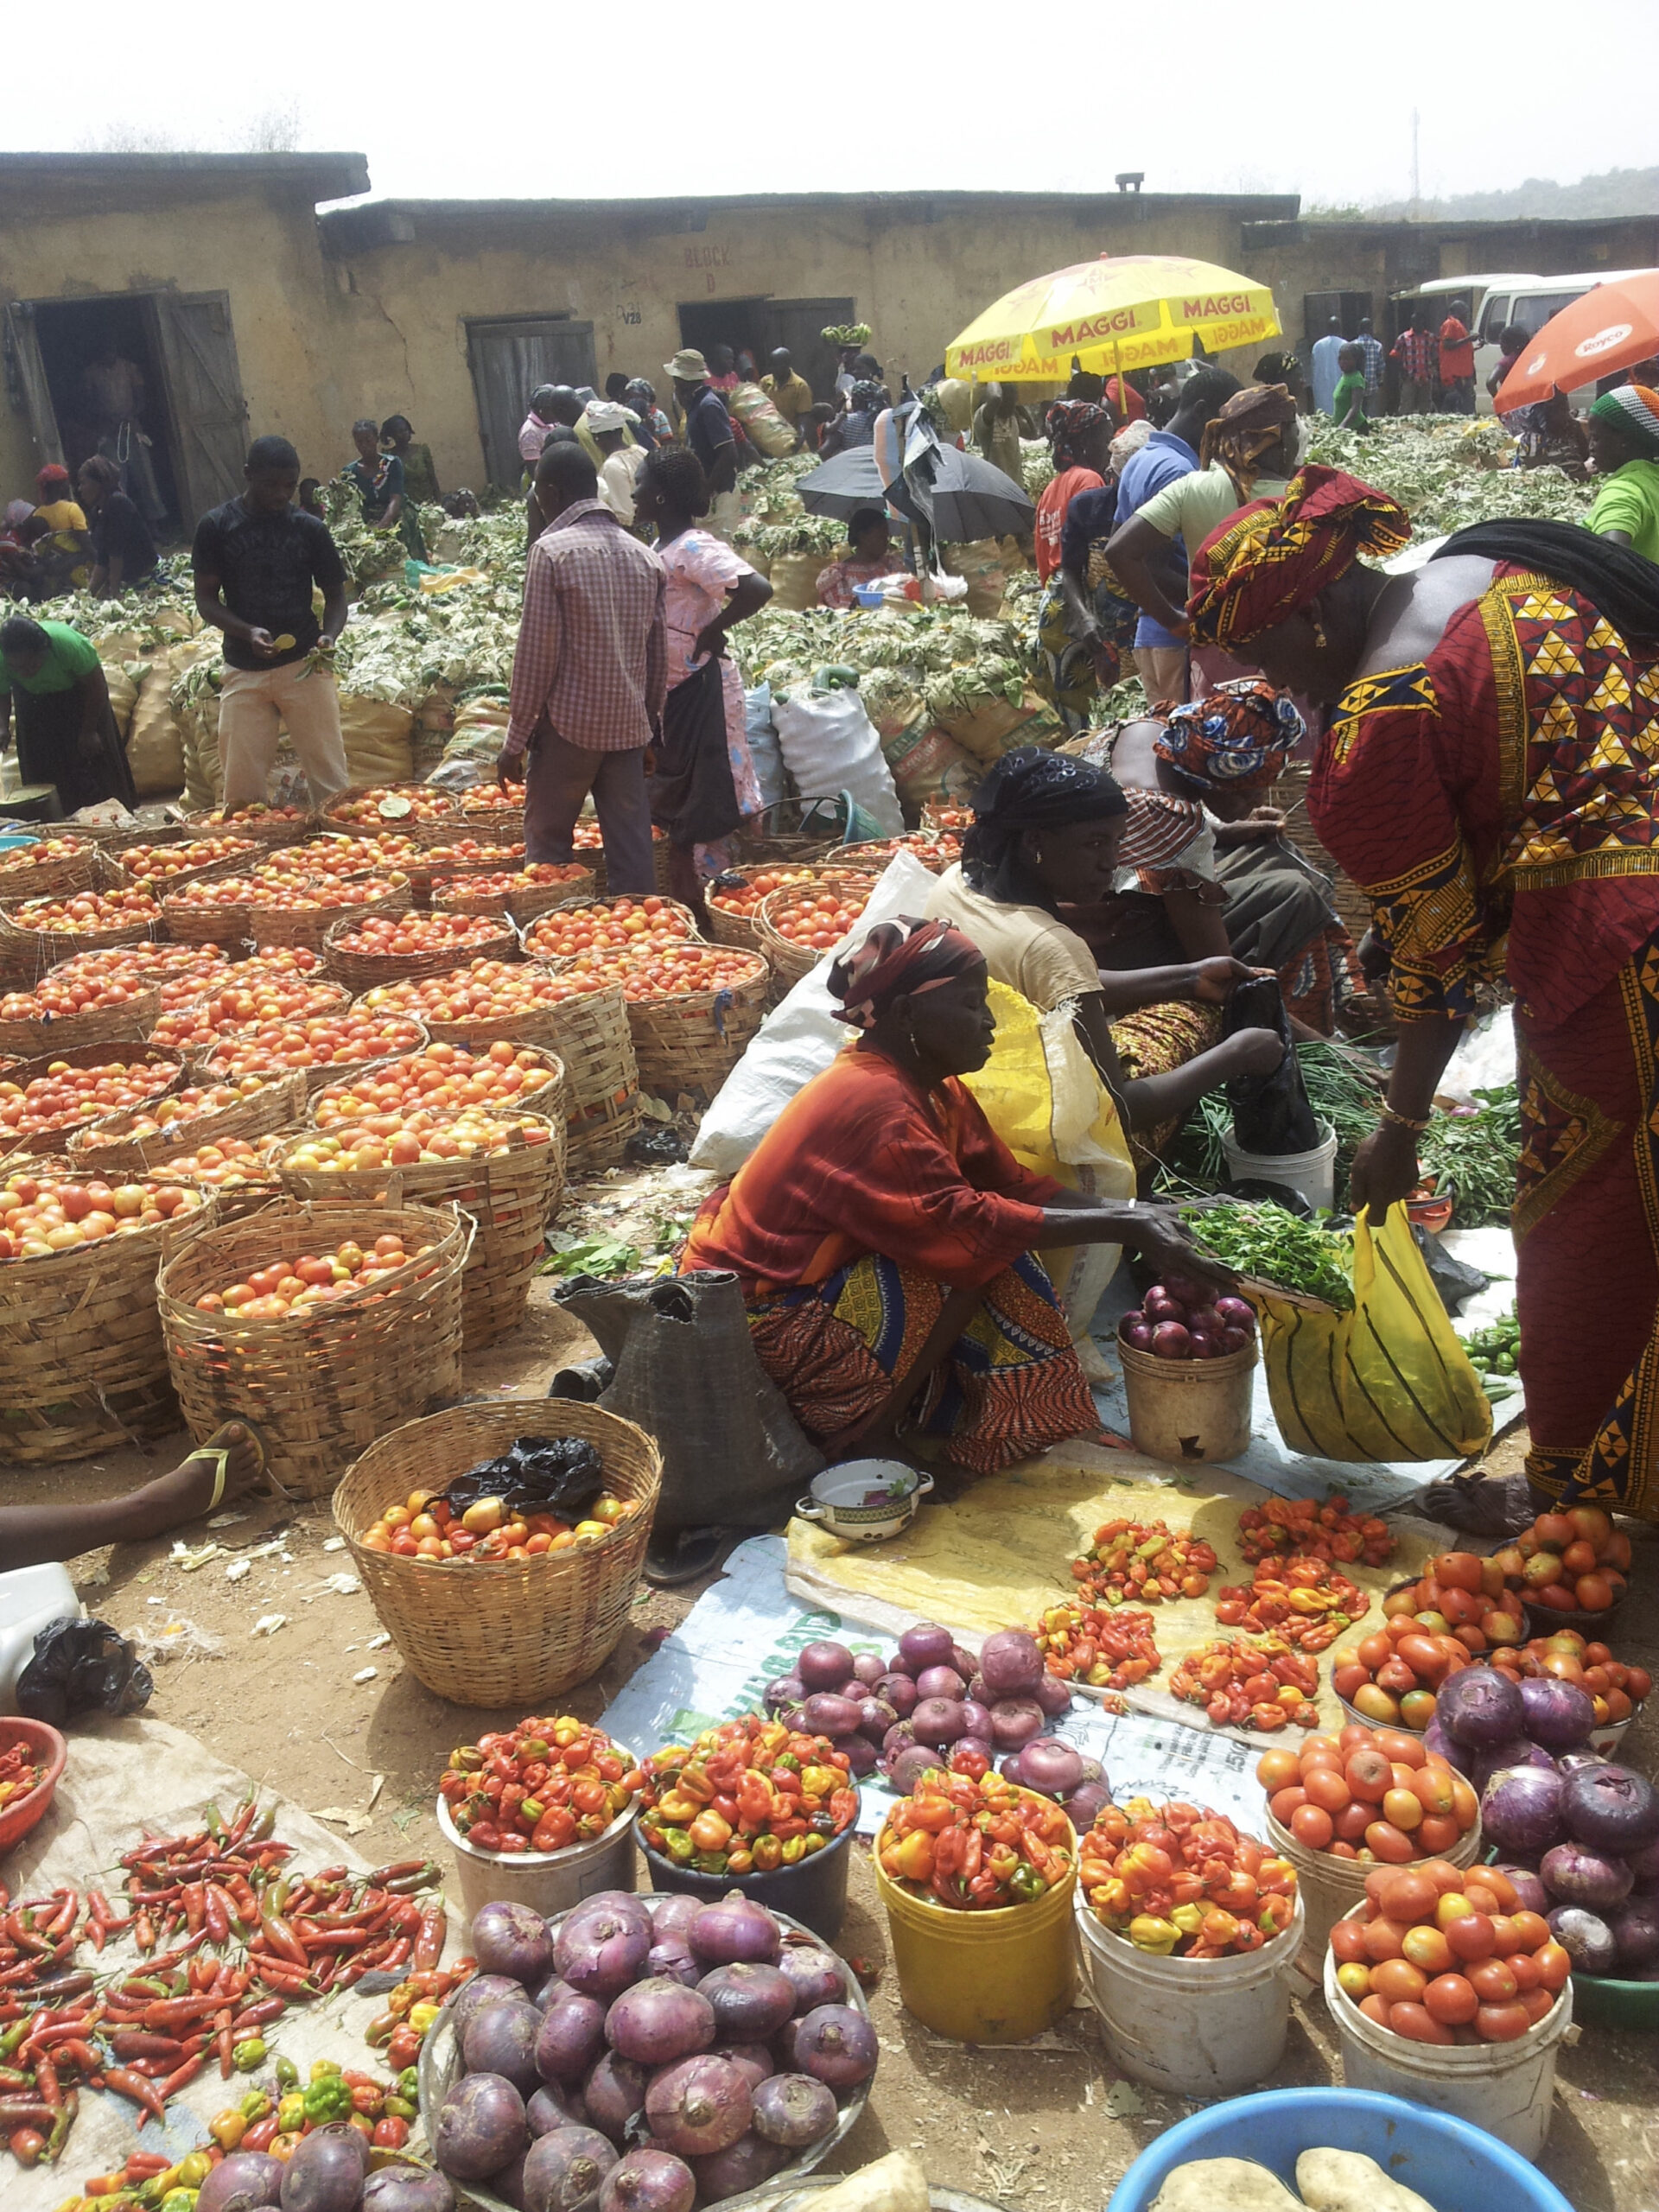 Women sell tomatoes and onions at a local market in Nigeria.